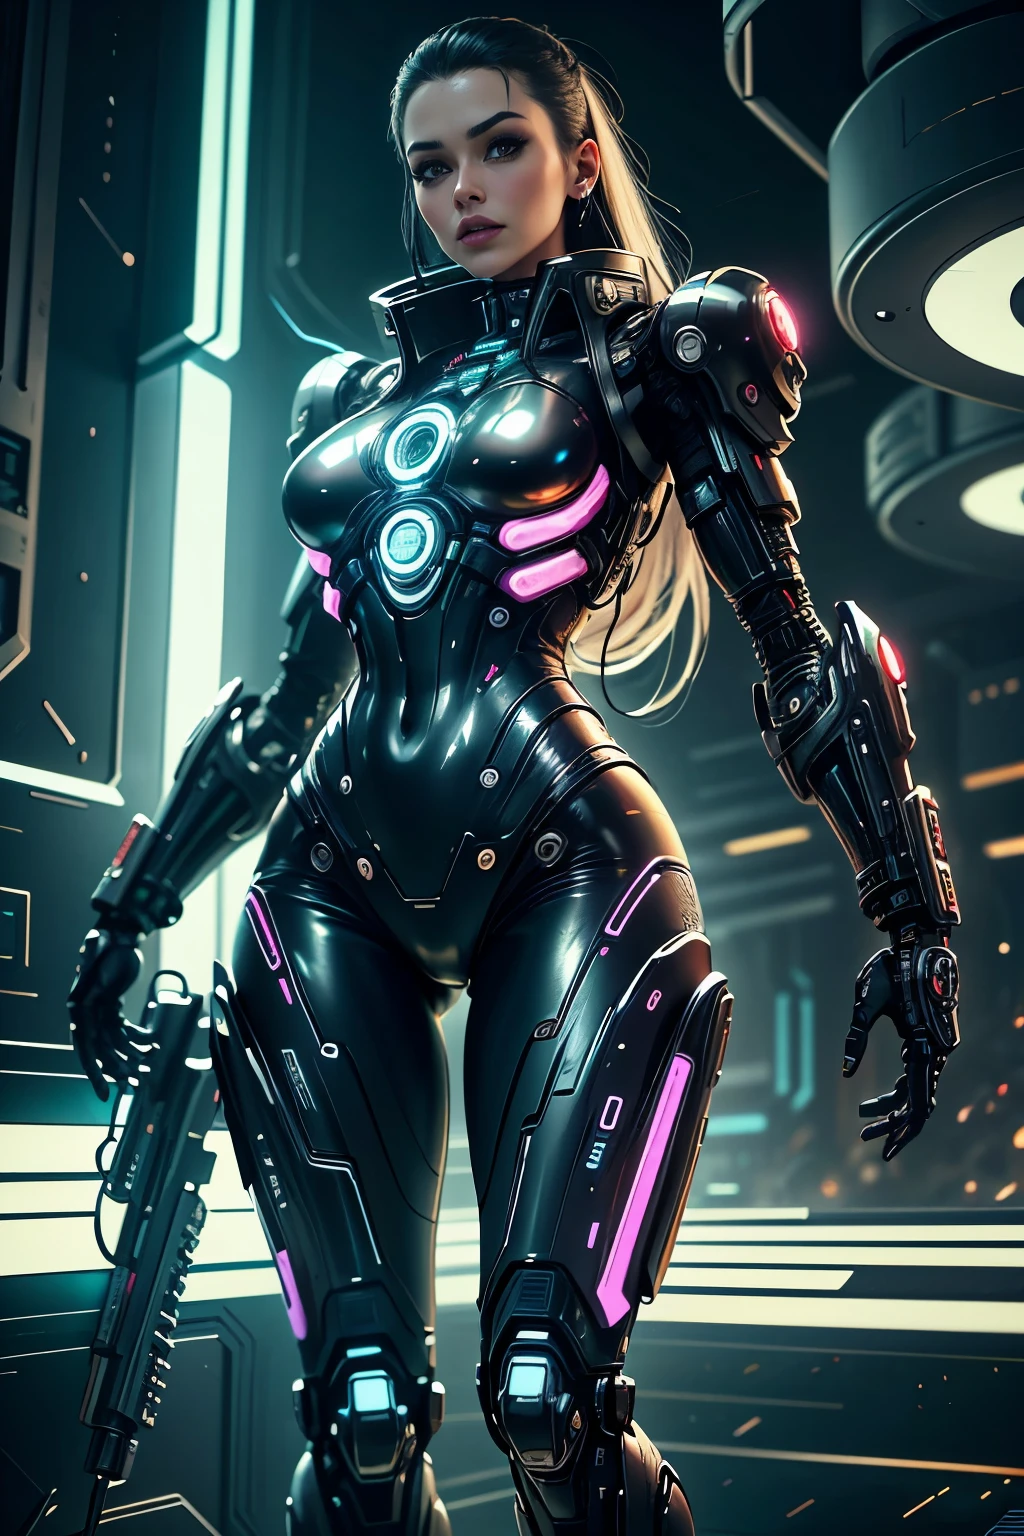 Cyberwoman Hall in Cyberpunk City of the Future々and cyberpunk women, with a full body on display, is depicted in a futuristic cyberpunk city. His eyes sparkle with intense neon, reflecting the cityscape filled with dystopian skyscrapers, holographic advertisements and flying vehicles amid a night sky lit by vibrant neons. The cybernetic woman sports a shiny metallic skin, covered in intricate cybernetic details and circuit tattoos. His posture is confident、Challenging